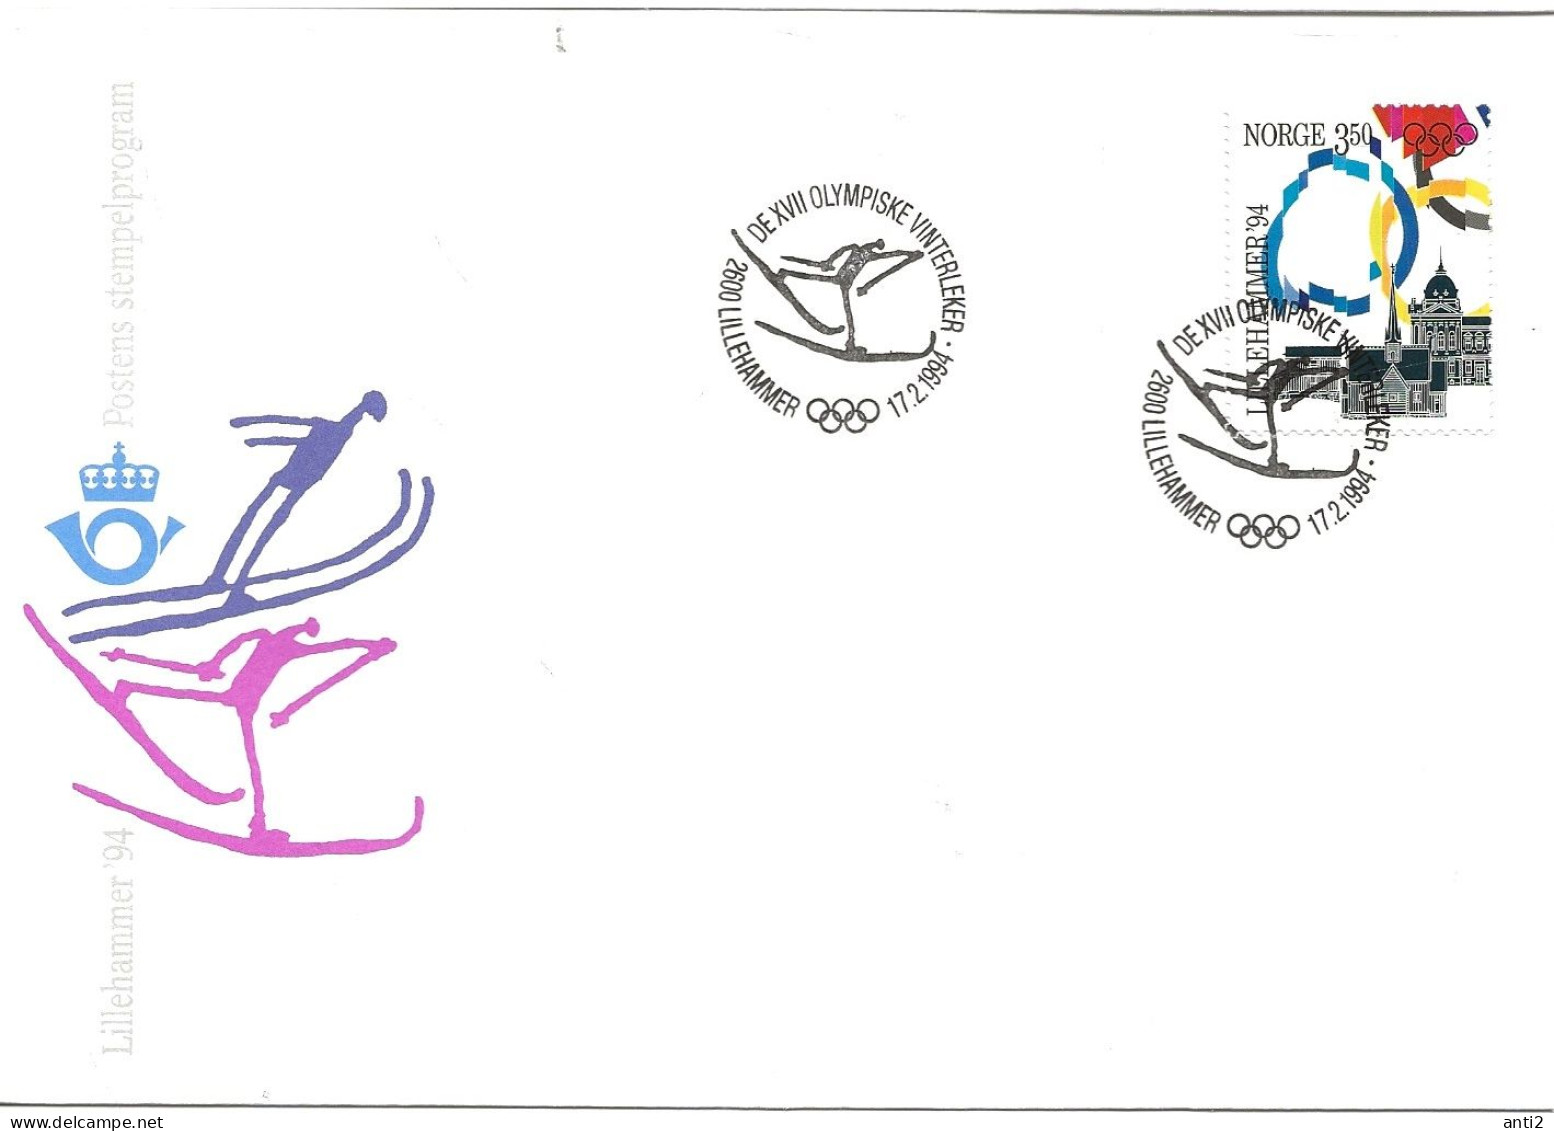 Norway Norge 1994 Winter Olympics, Lillehammer - Flags Mi 1148  Skiing Cross Country Cancelled Lillehammer 17.2.94 - Storia Postale